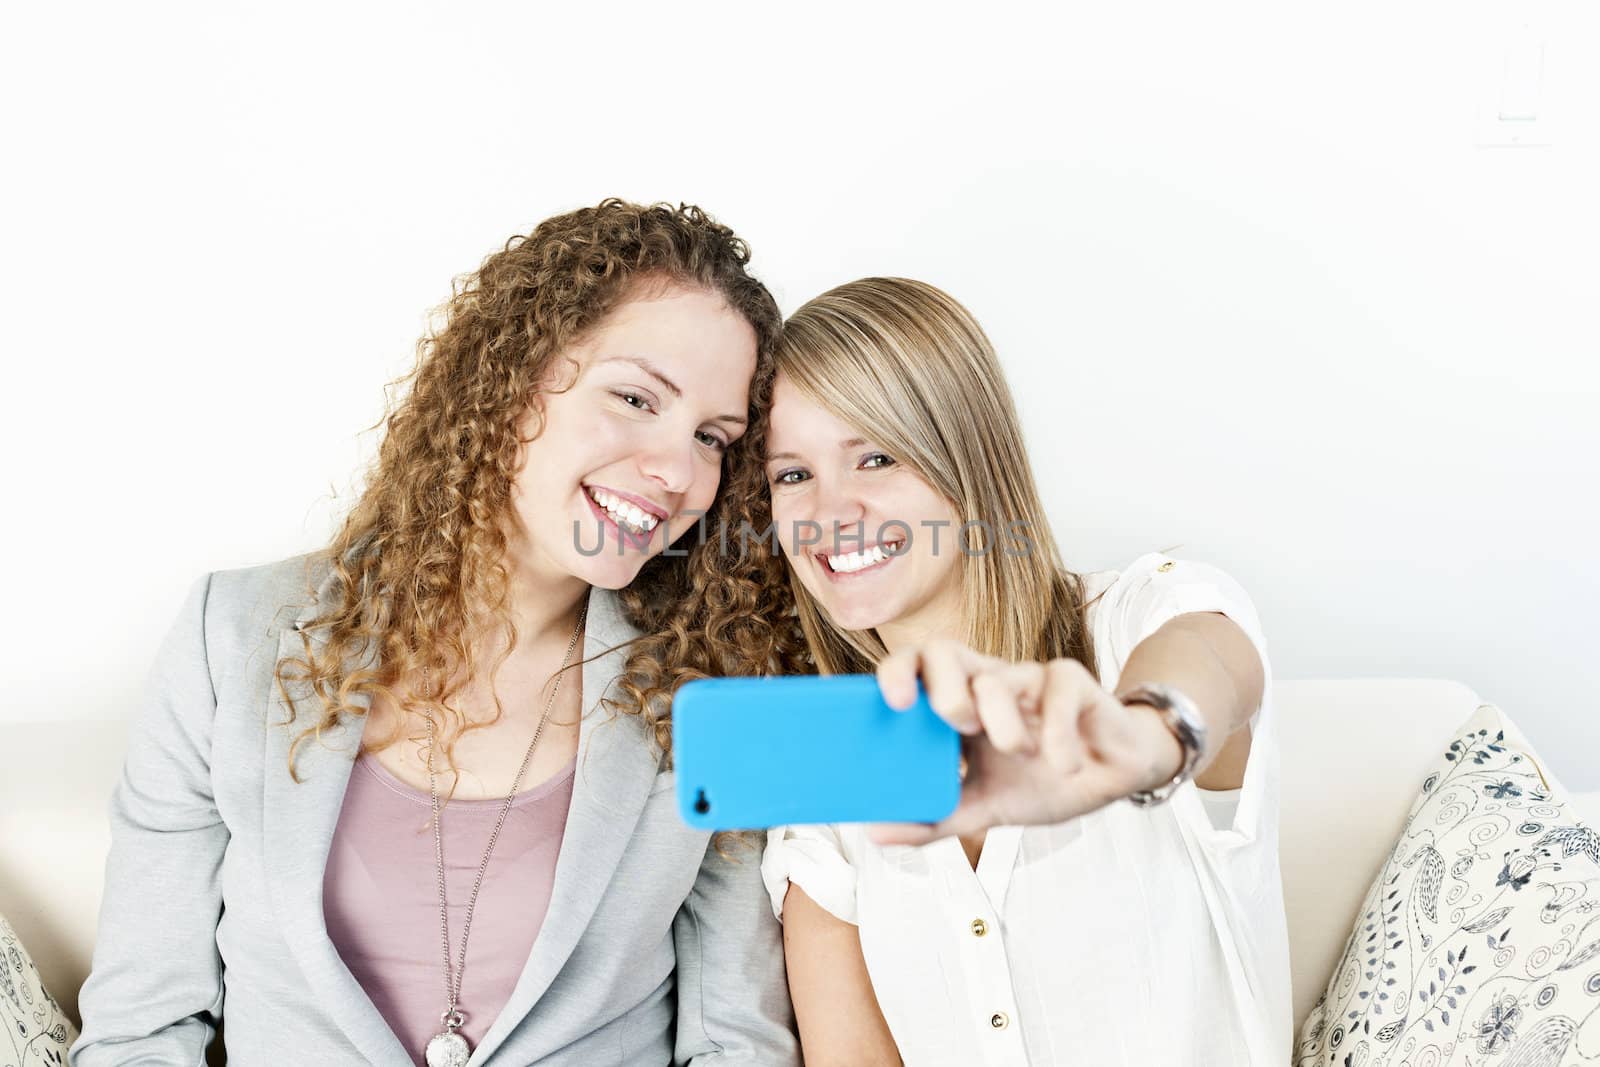 Two smiling women using cellular mobile phone to take a picture